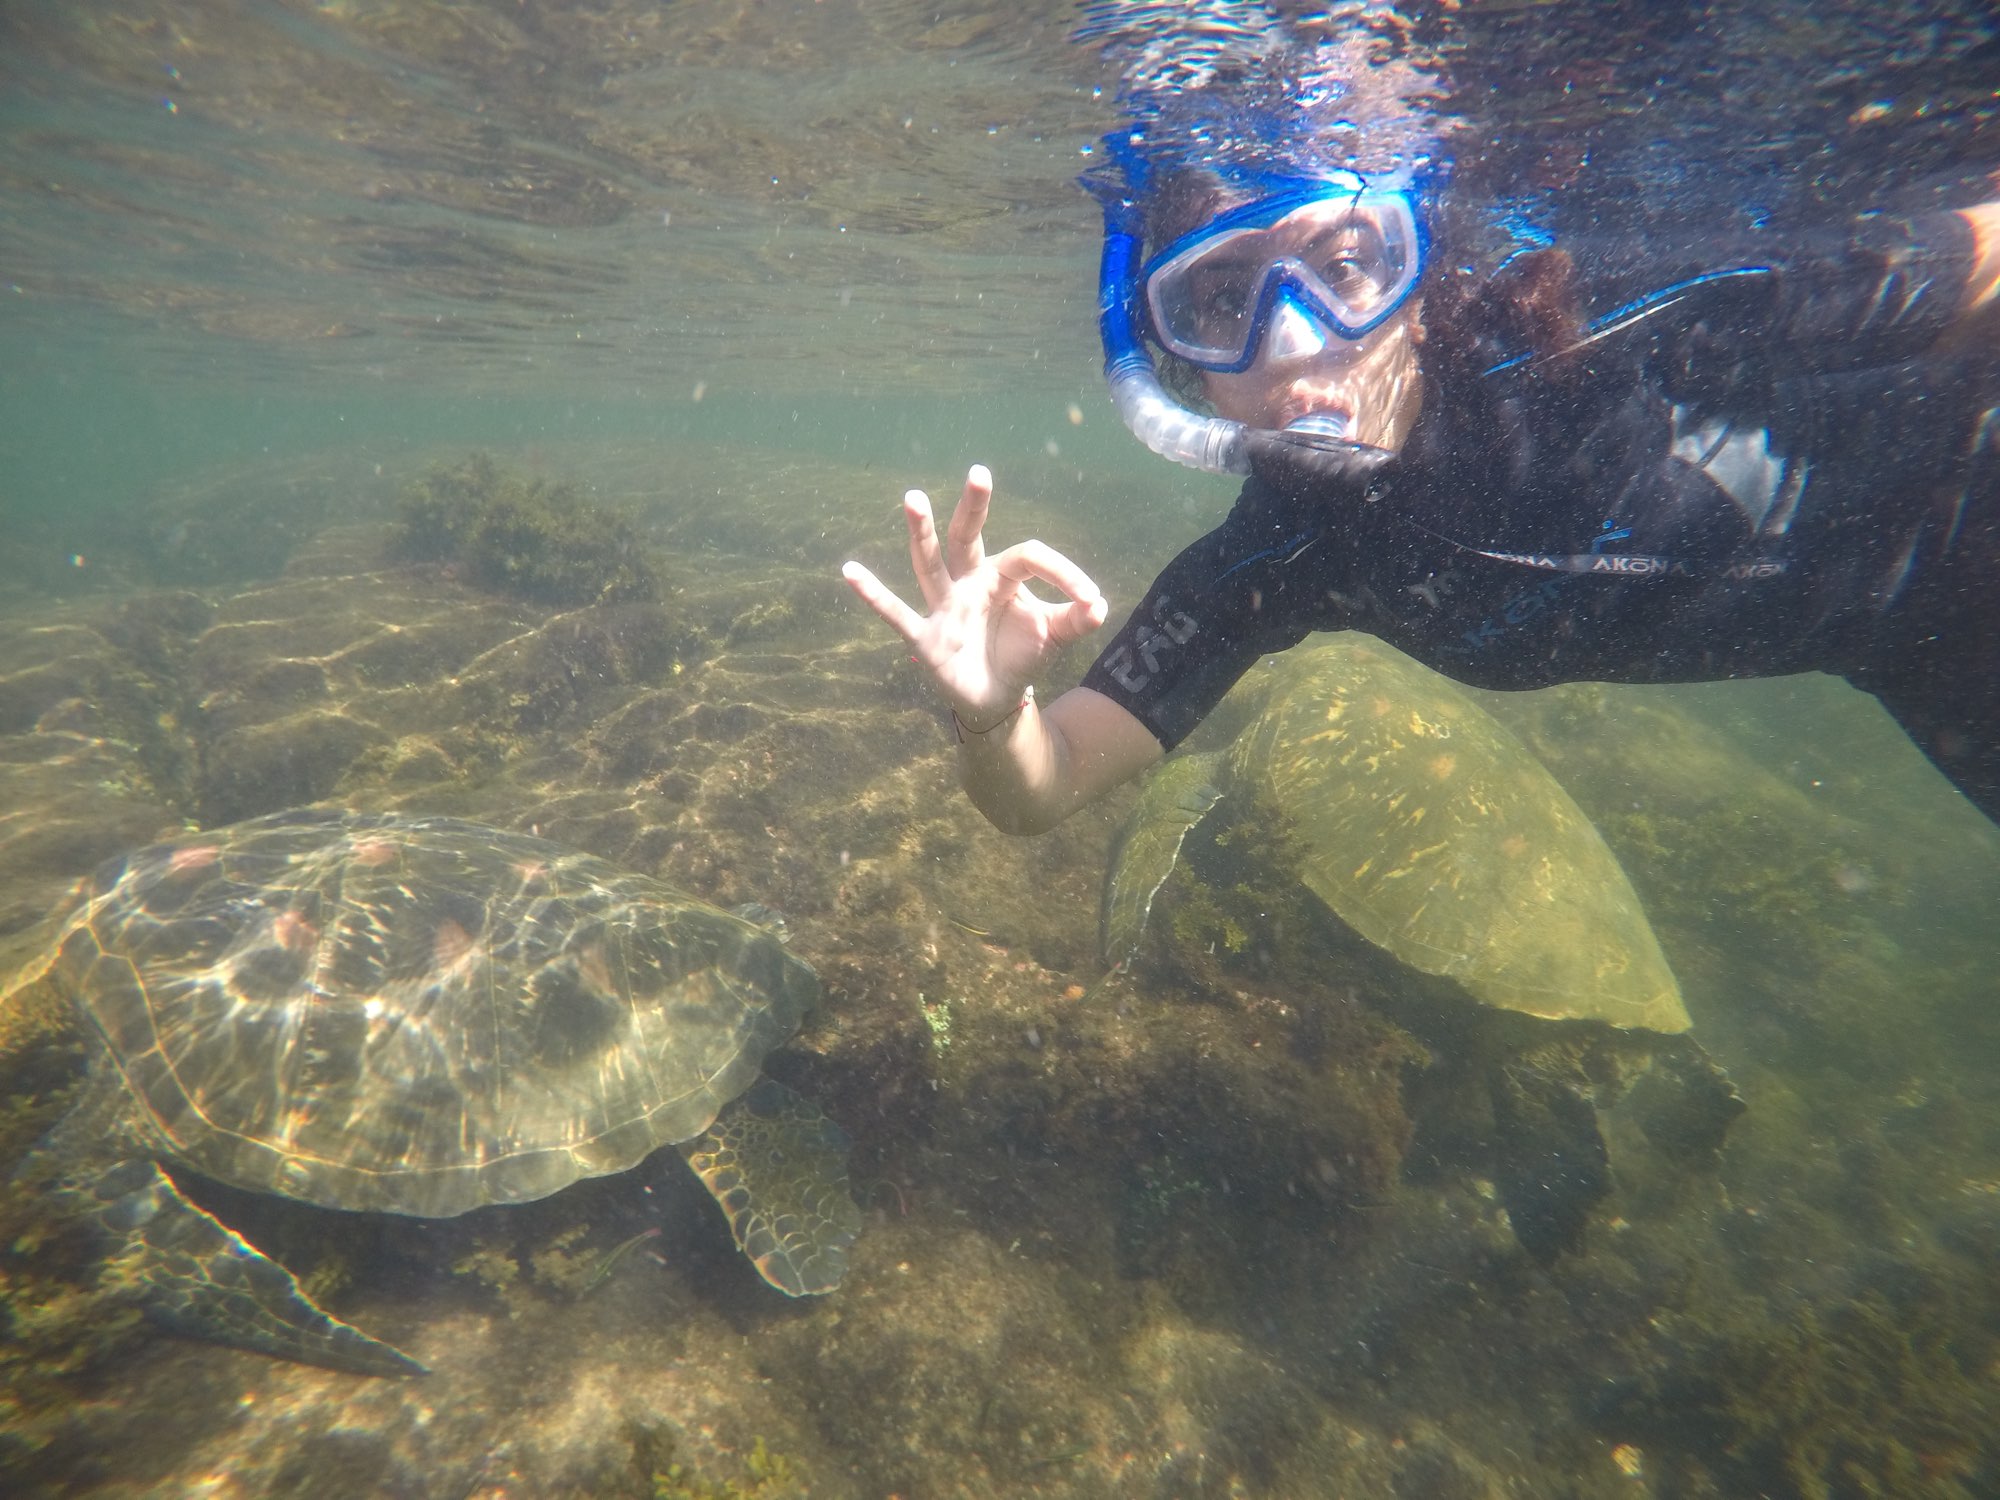 Alisha Soni makes an "OK" sign as she snorkels next to a large sea turtle